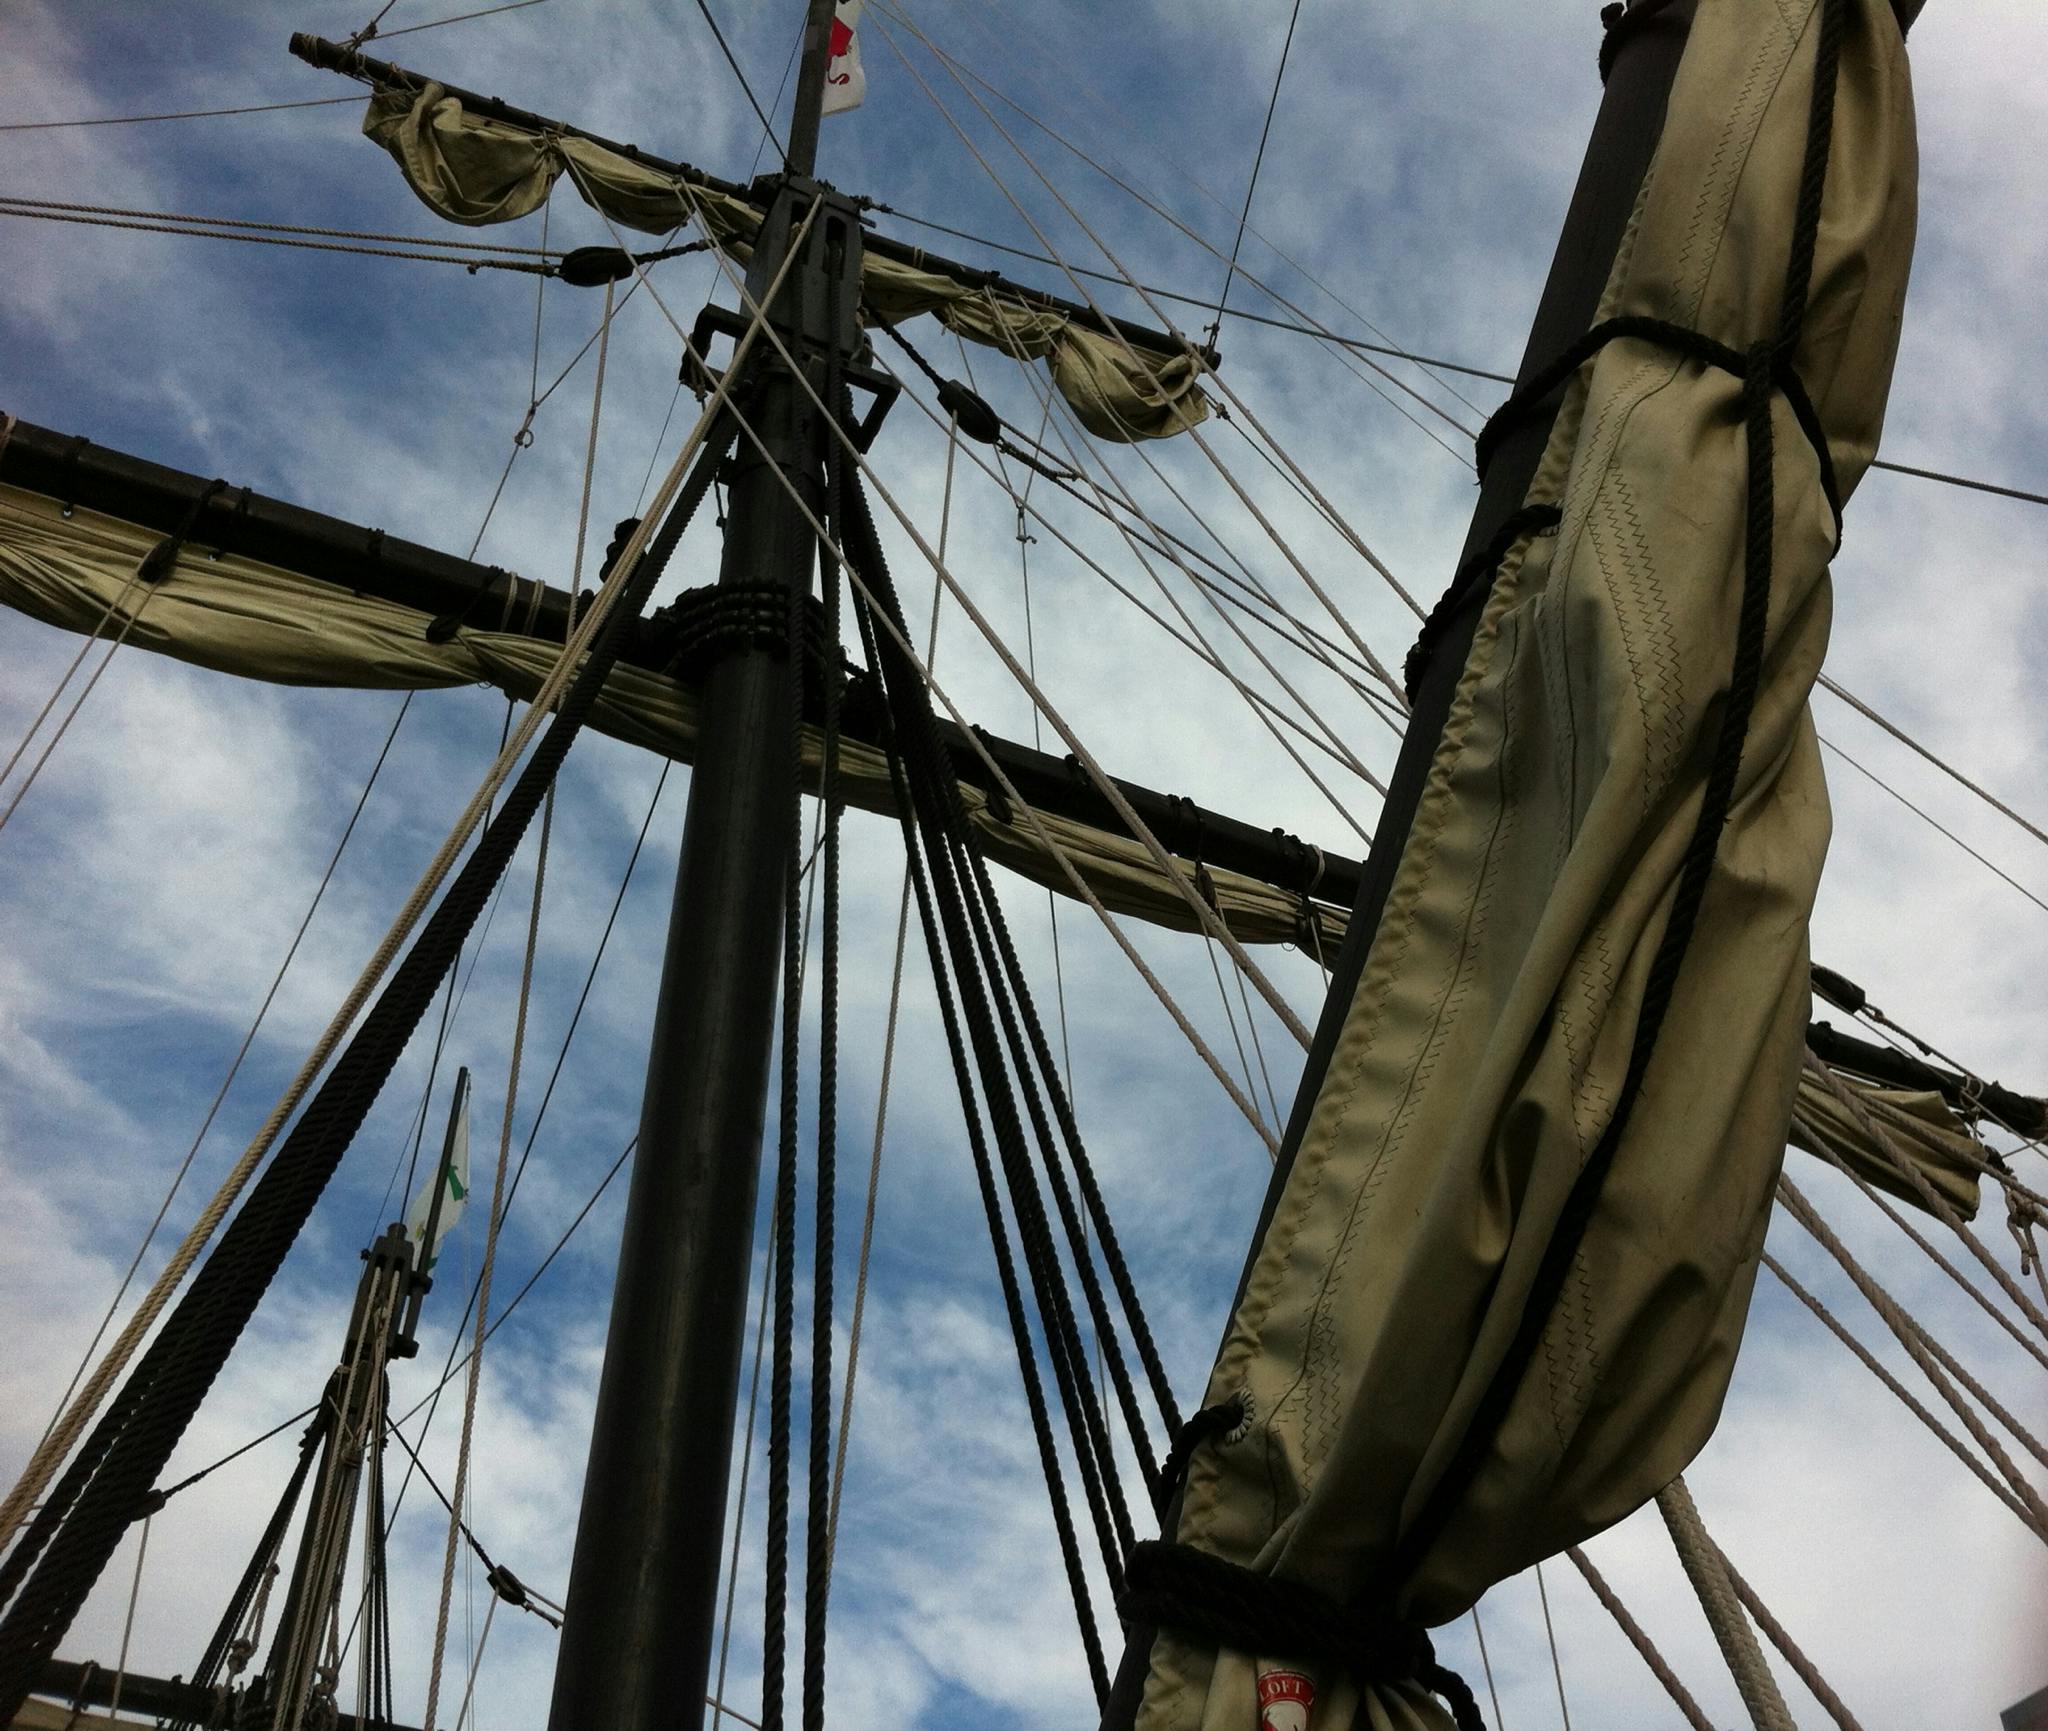 a close up of a sail on a body of water, renaissance, looking up onto the sky, docked at harbor, pirate clothing, phone photo